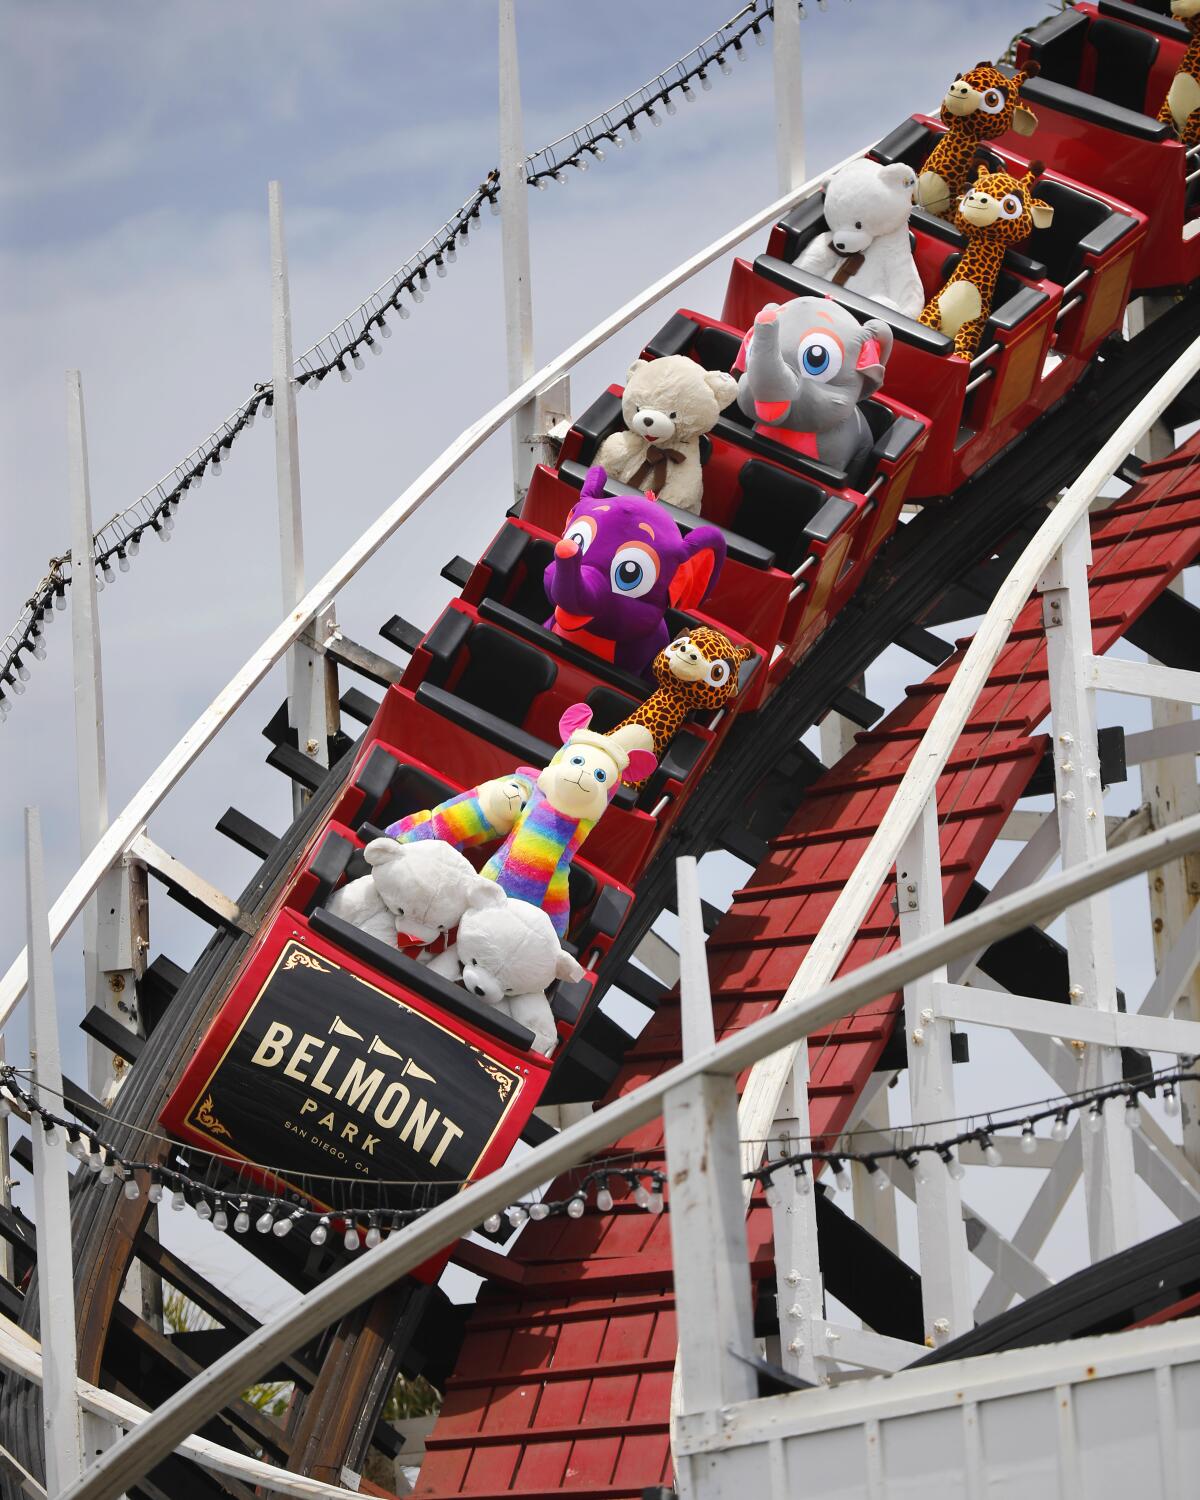 Stuffed animals ride the Giant Dipper roller coaster at Belmont Park during coronavirus closures.